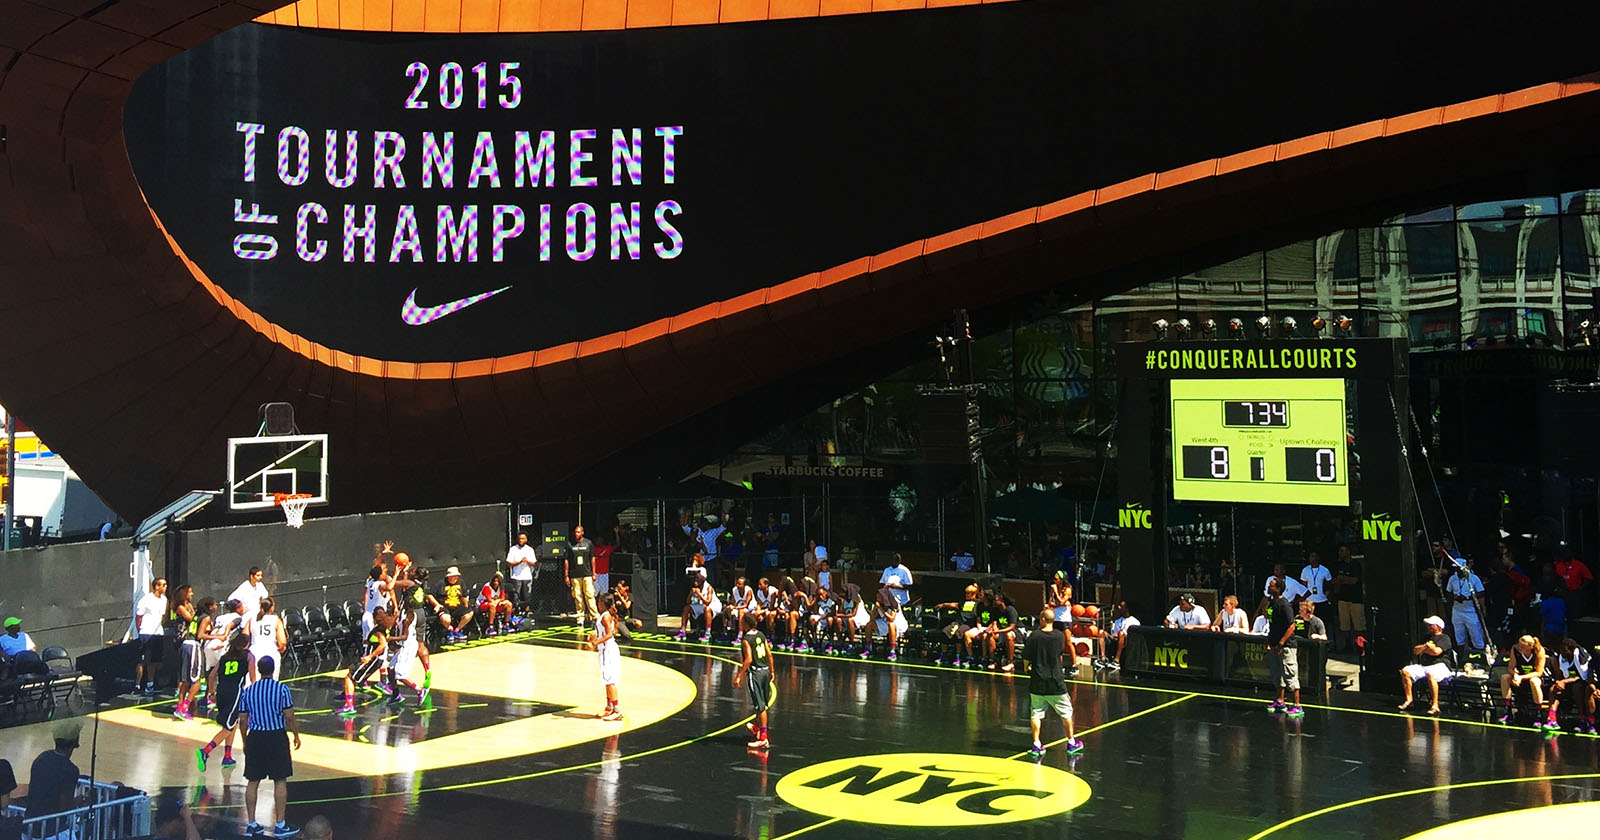 Arriesgado Maestría Subir Nike's Tournament of Champions | Frost Productions